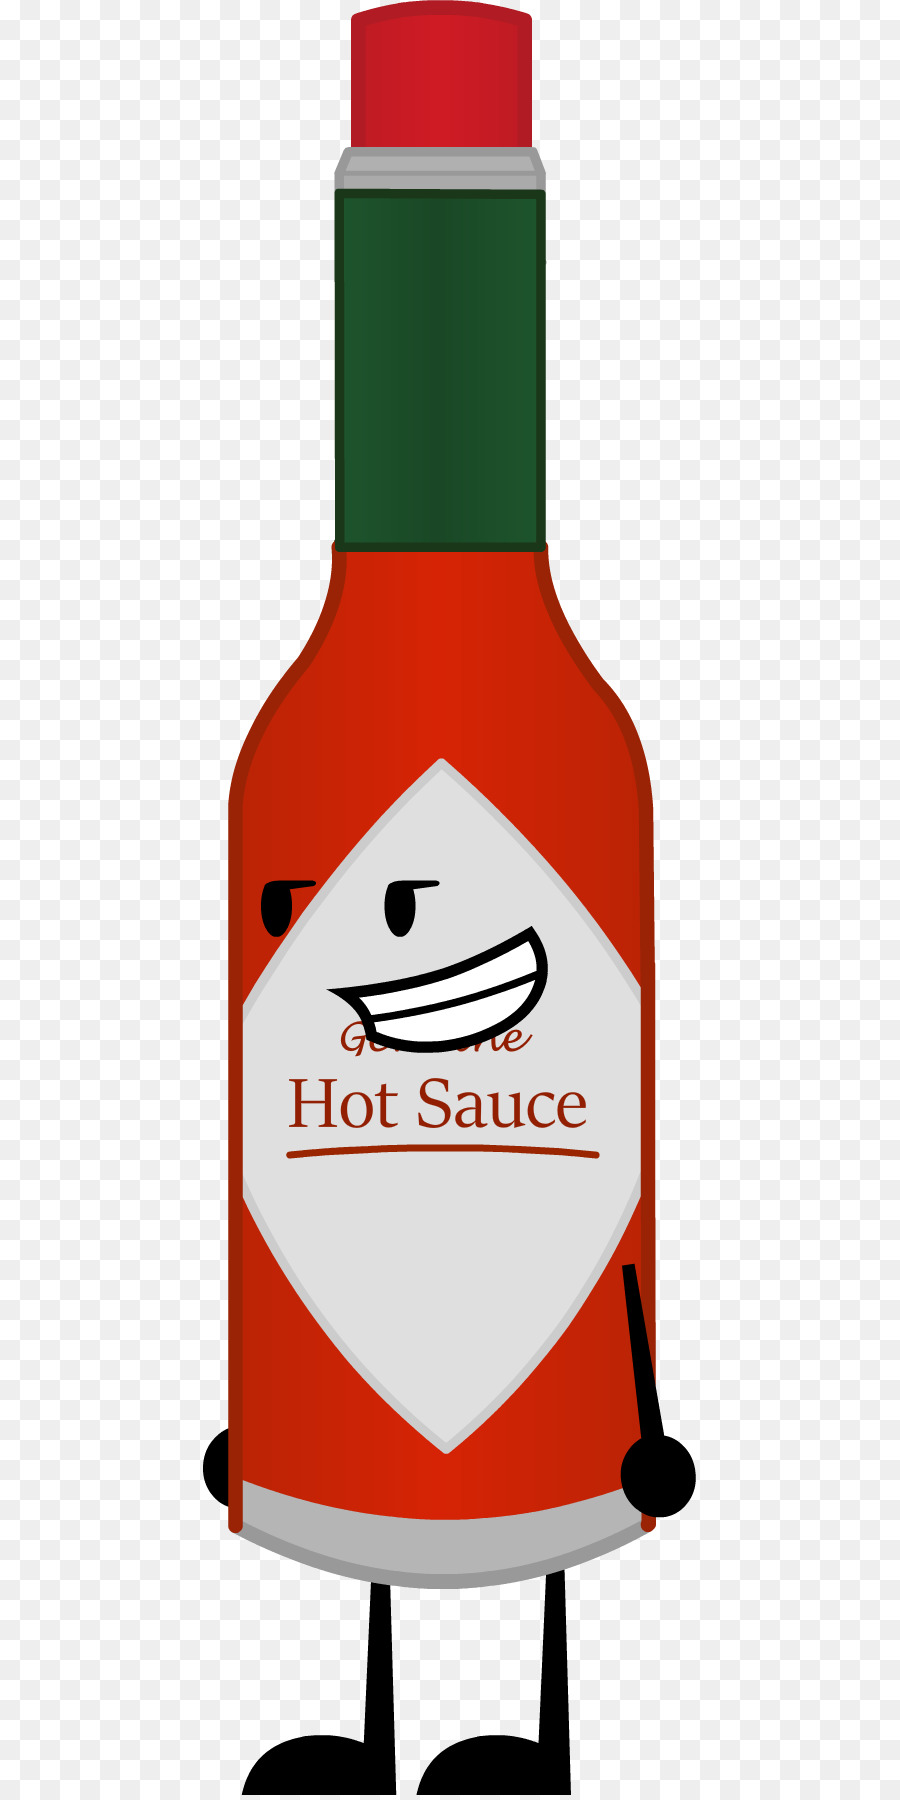 Hot sauce clipart 7 » Clipart Station.